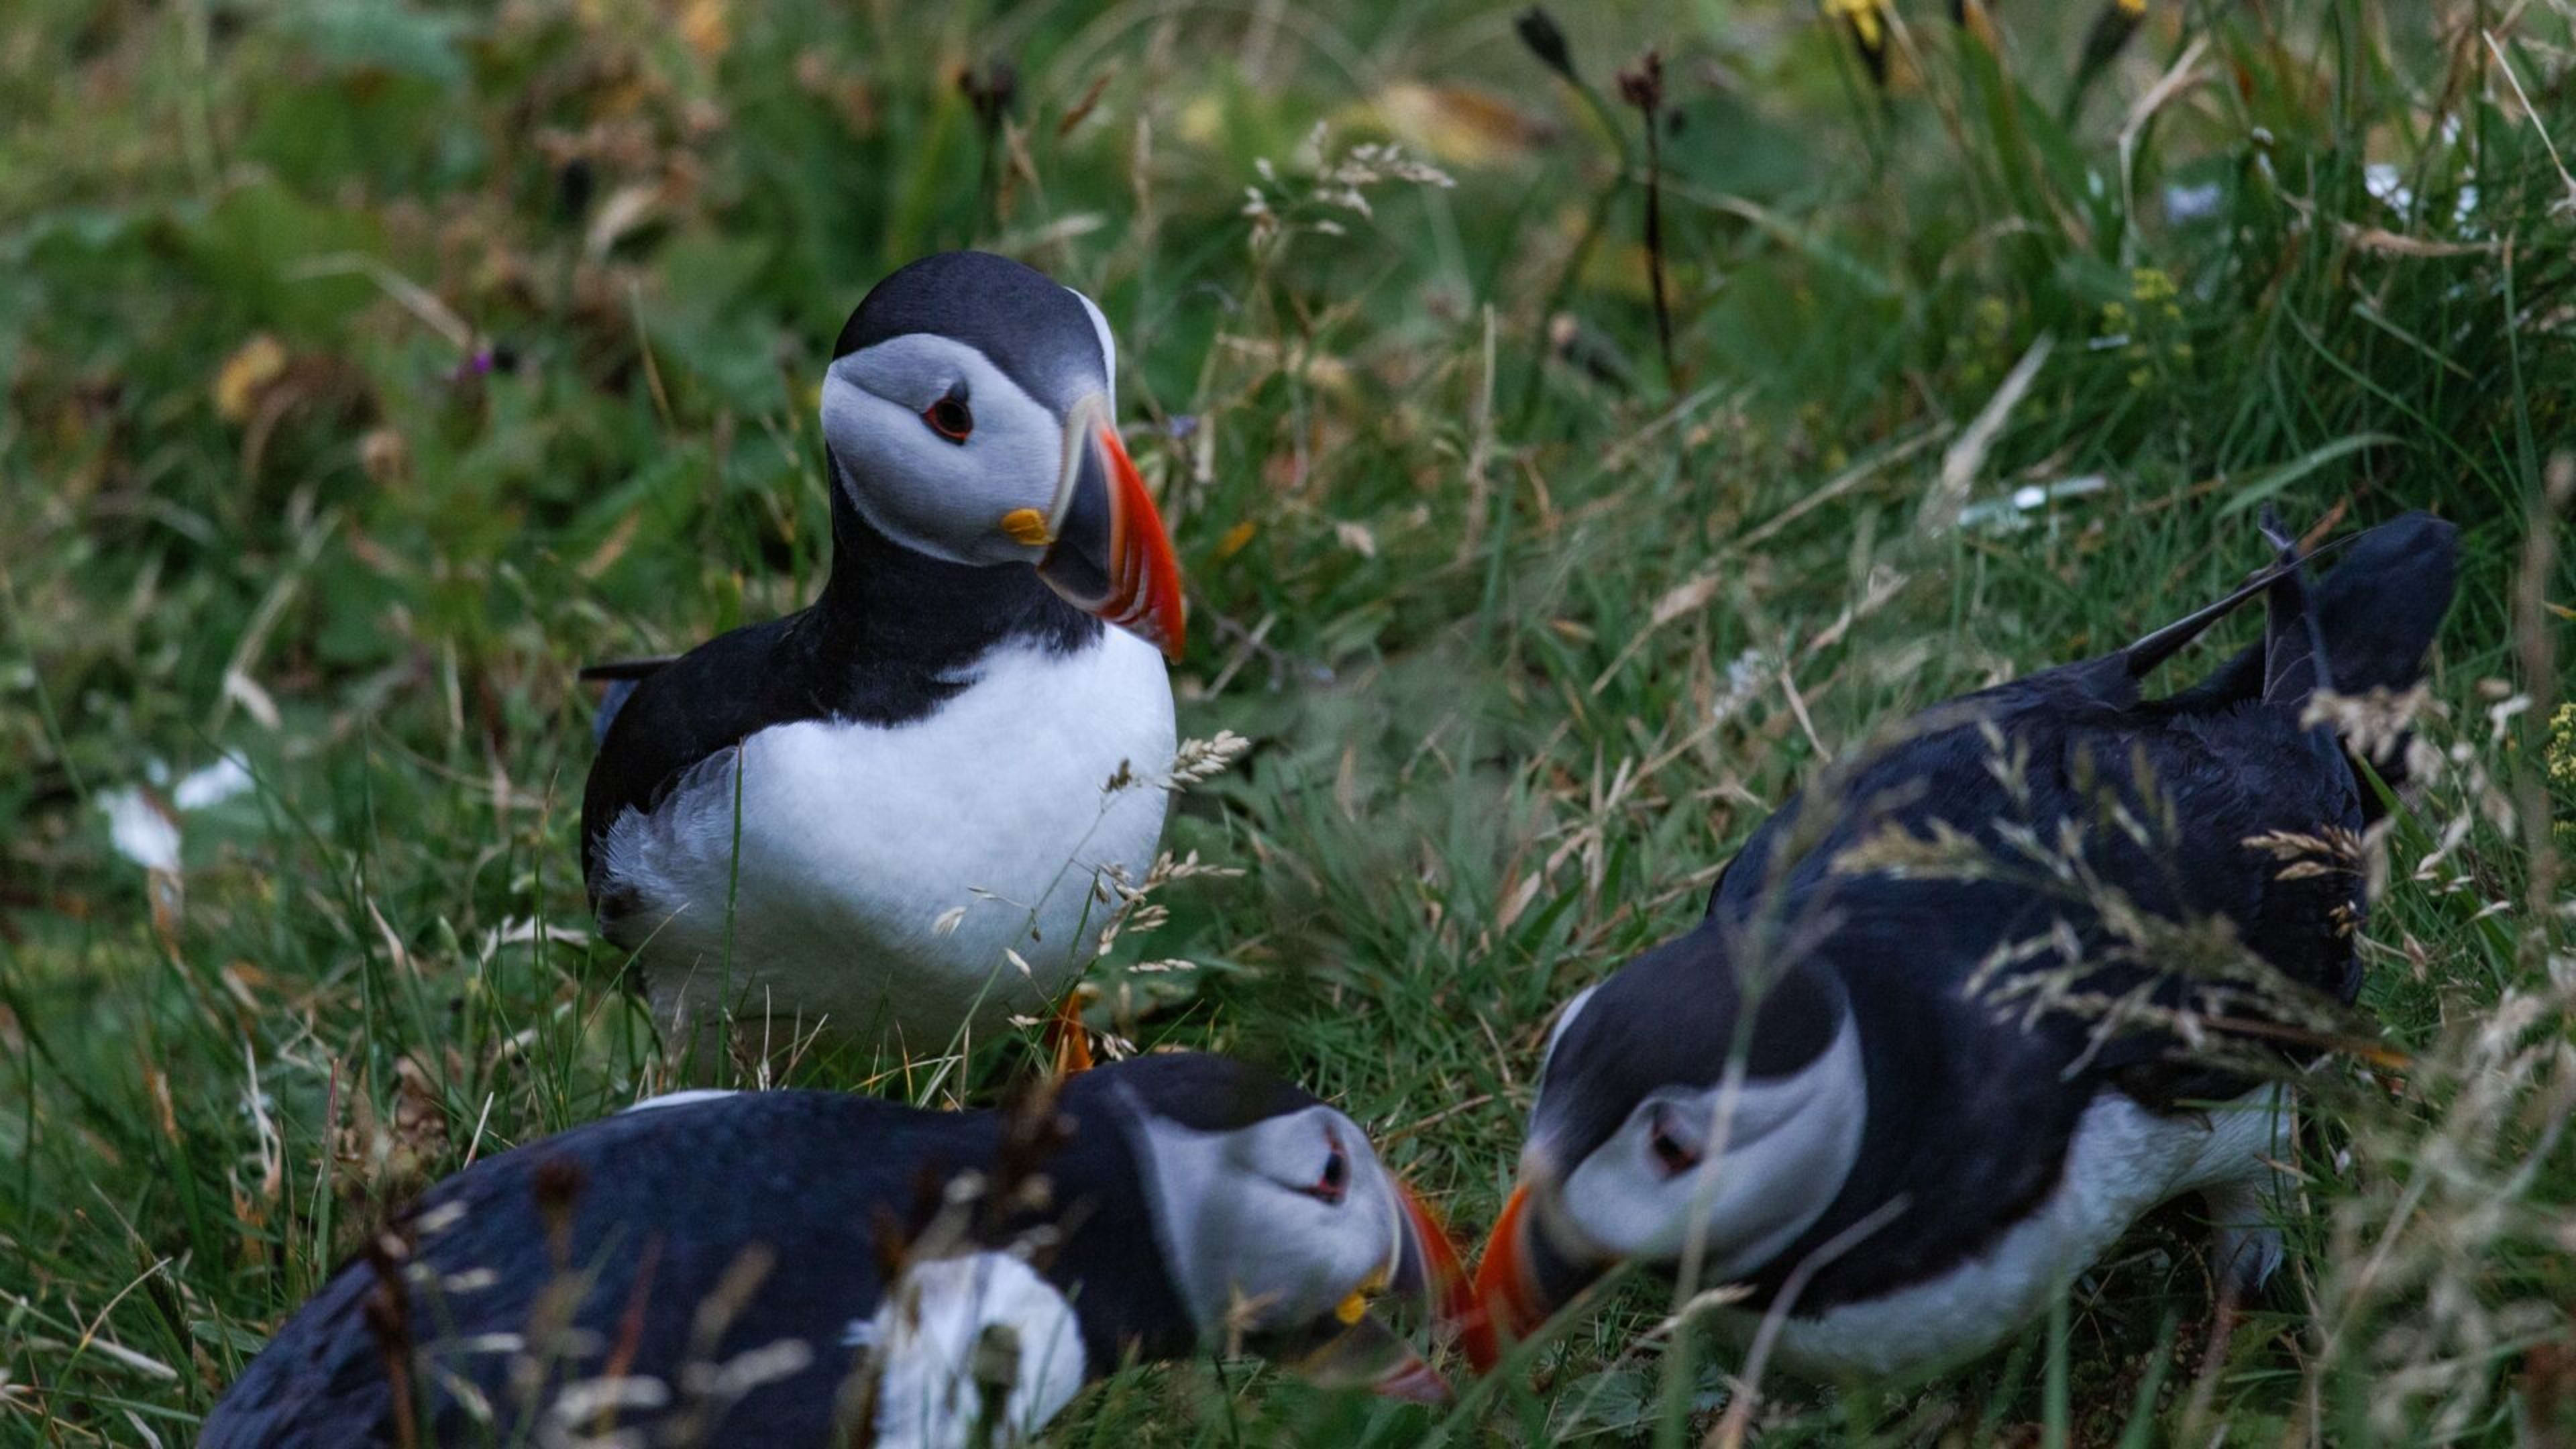 icelandic puffins in the grass